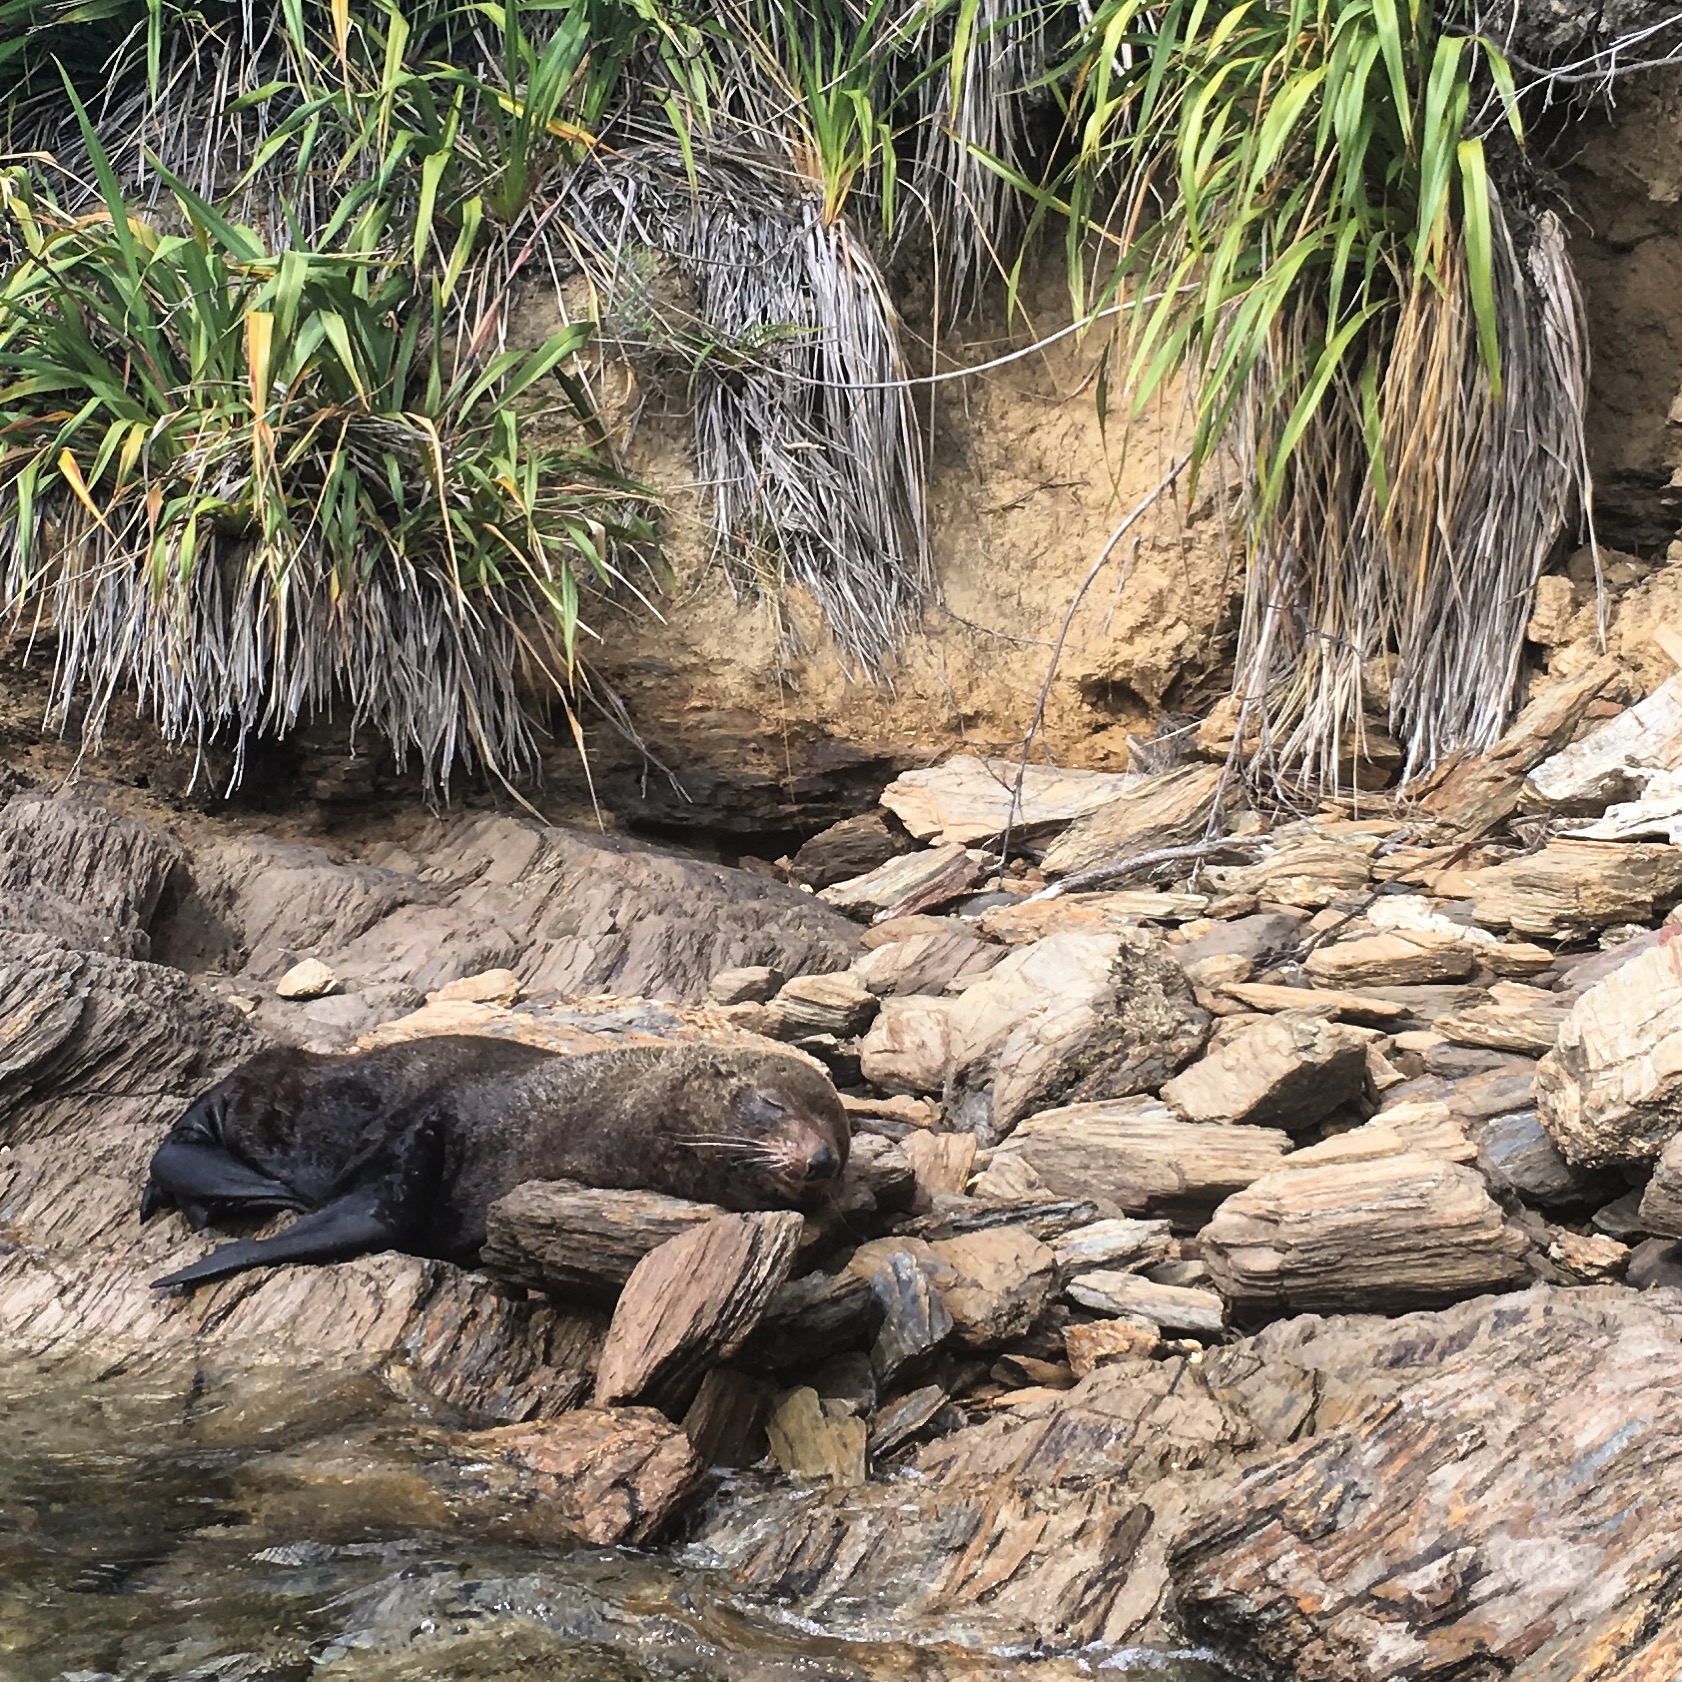 A seal sleeps on the shore in Queen Charlotte Sound, New Zealand.